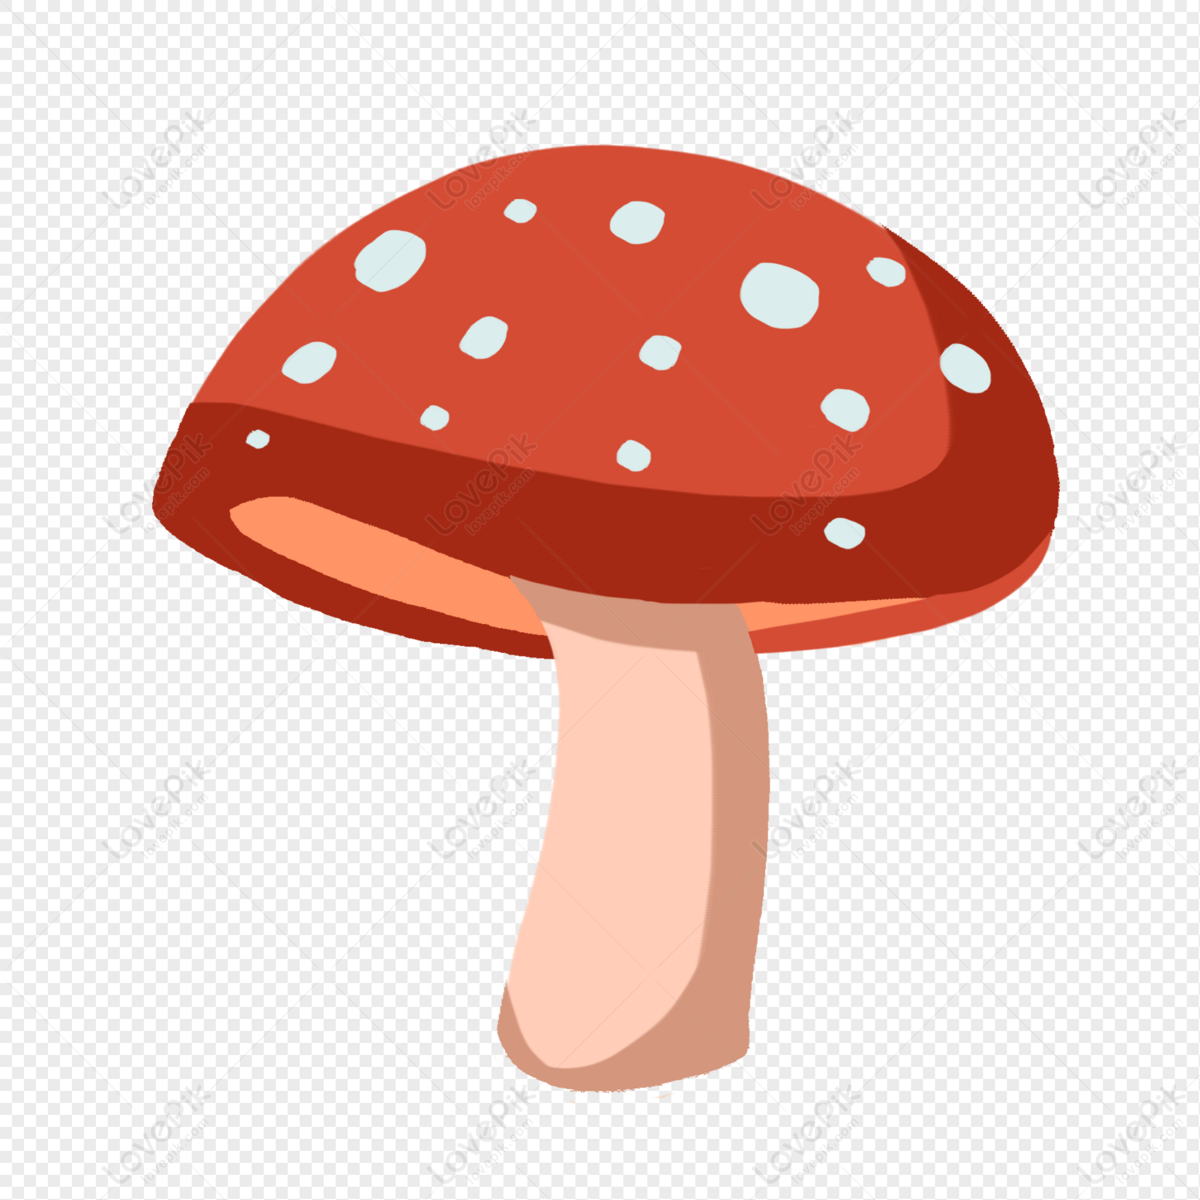 Mushroom PNG Transparent Image And Clipart Image For Free Download -  Lovepik | 401223467